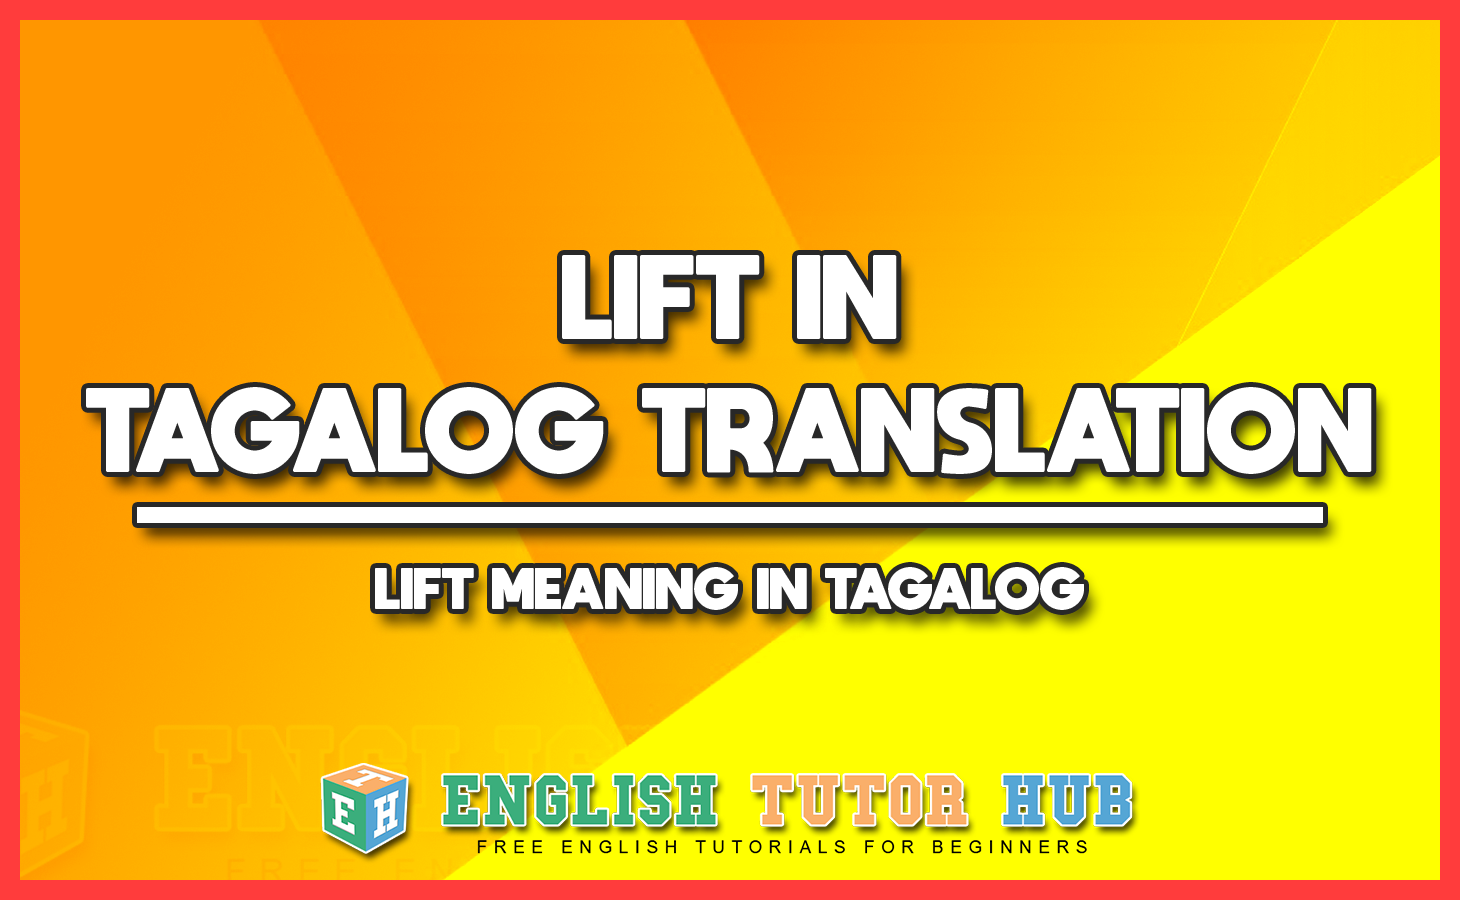 LIFT IN TAGALOG TRANSLATION - LIFT MEANING IN TAGALOG